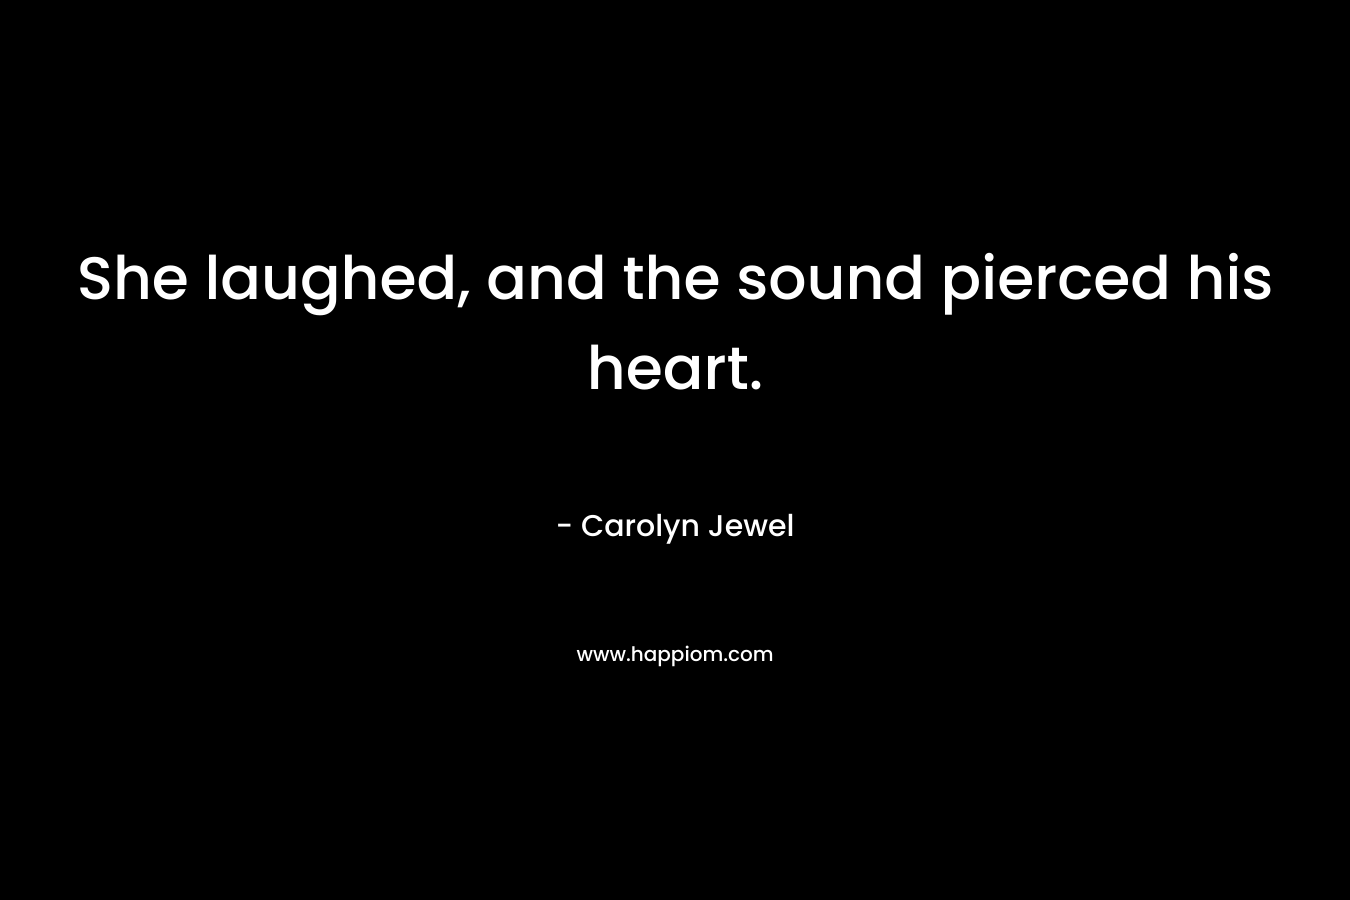 She laughed, and the sound pierced his heart. – Carolyn Jewel